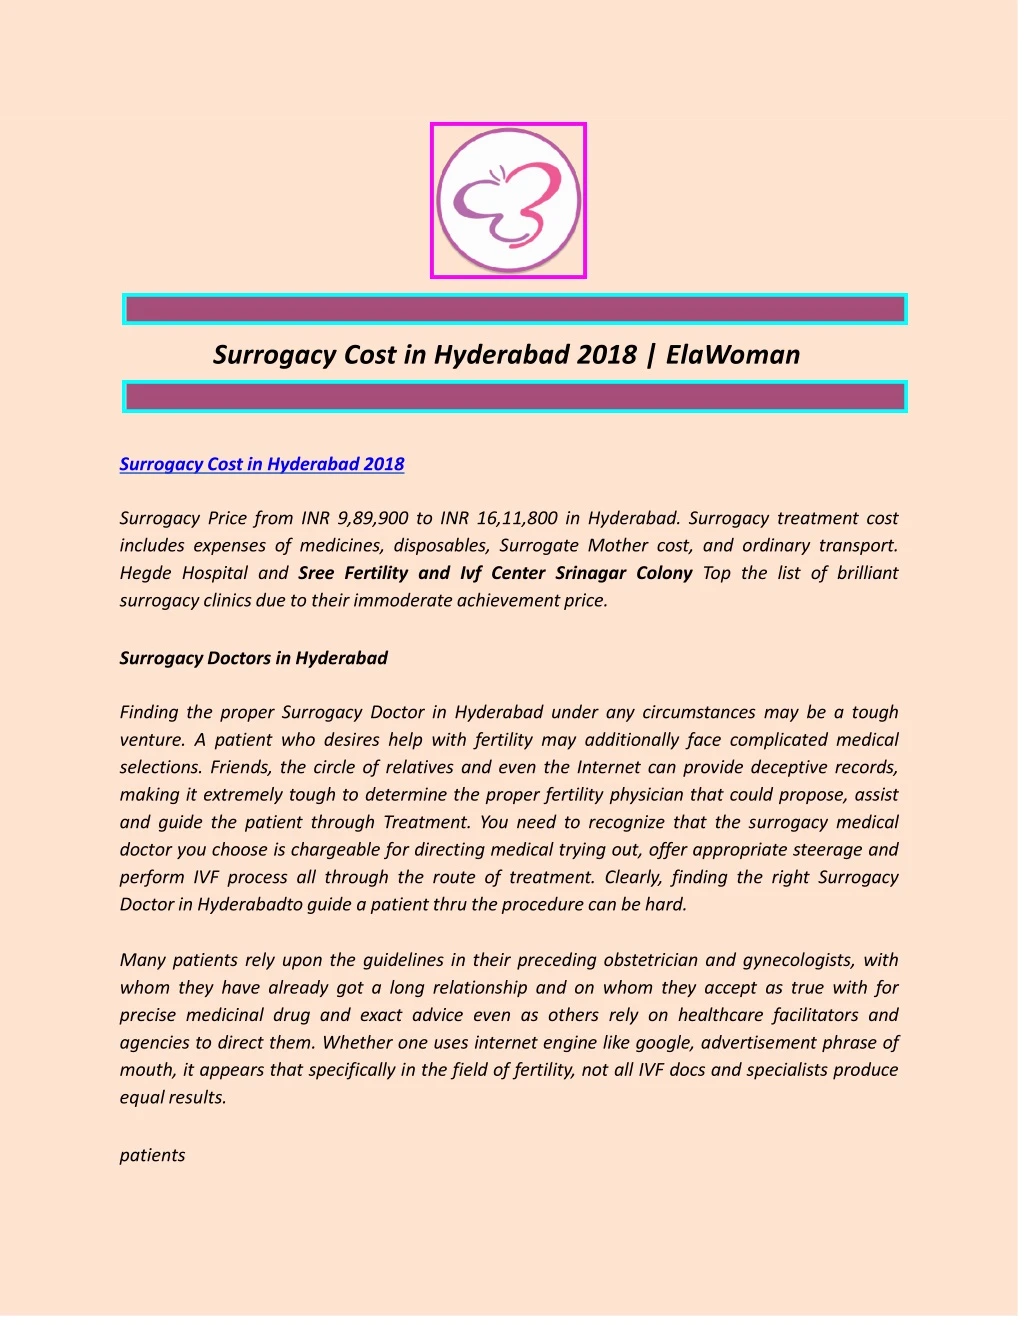 surrogacy cost in hyderabad 2018 elawoman